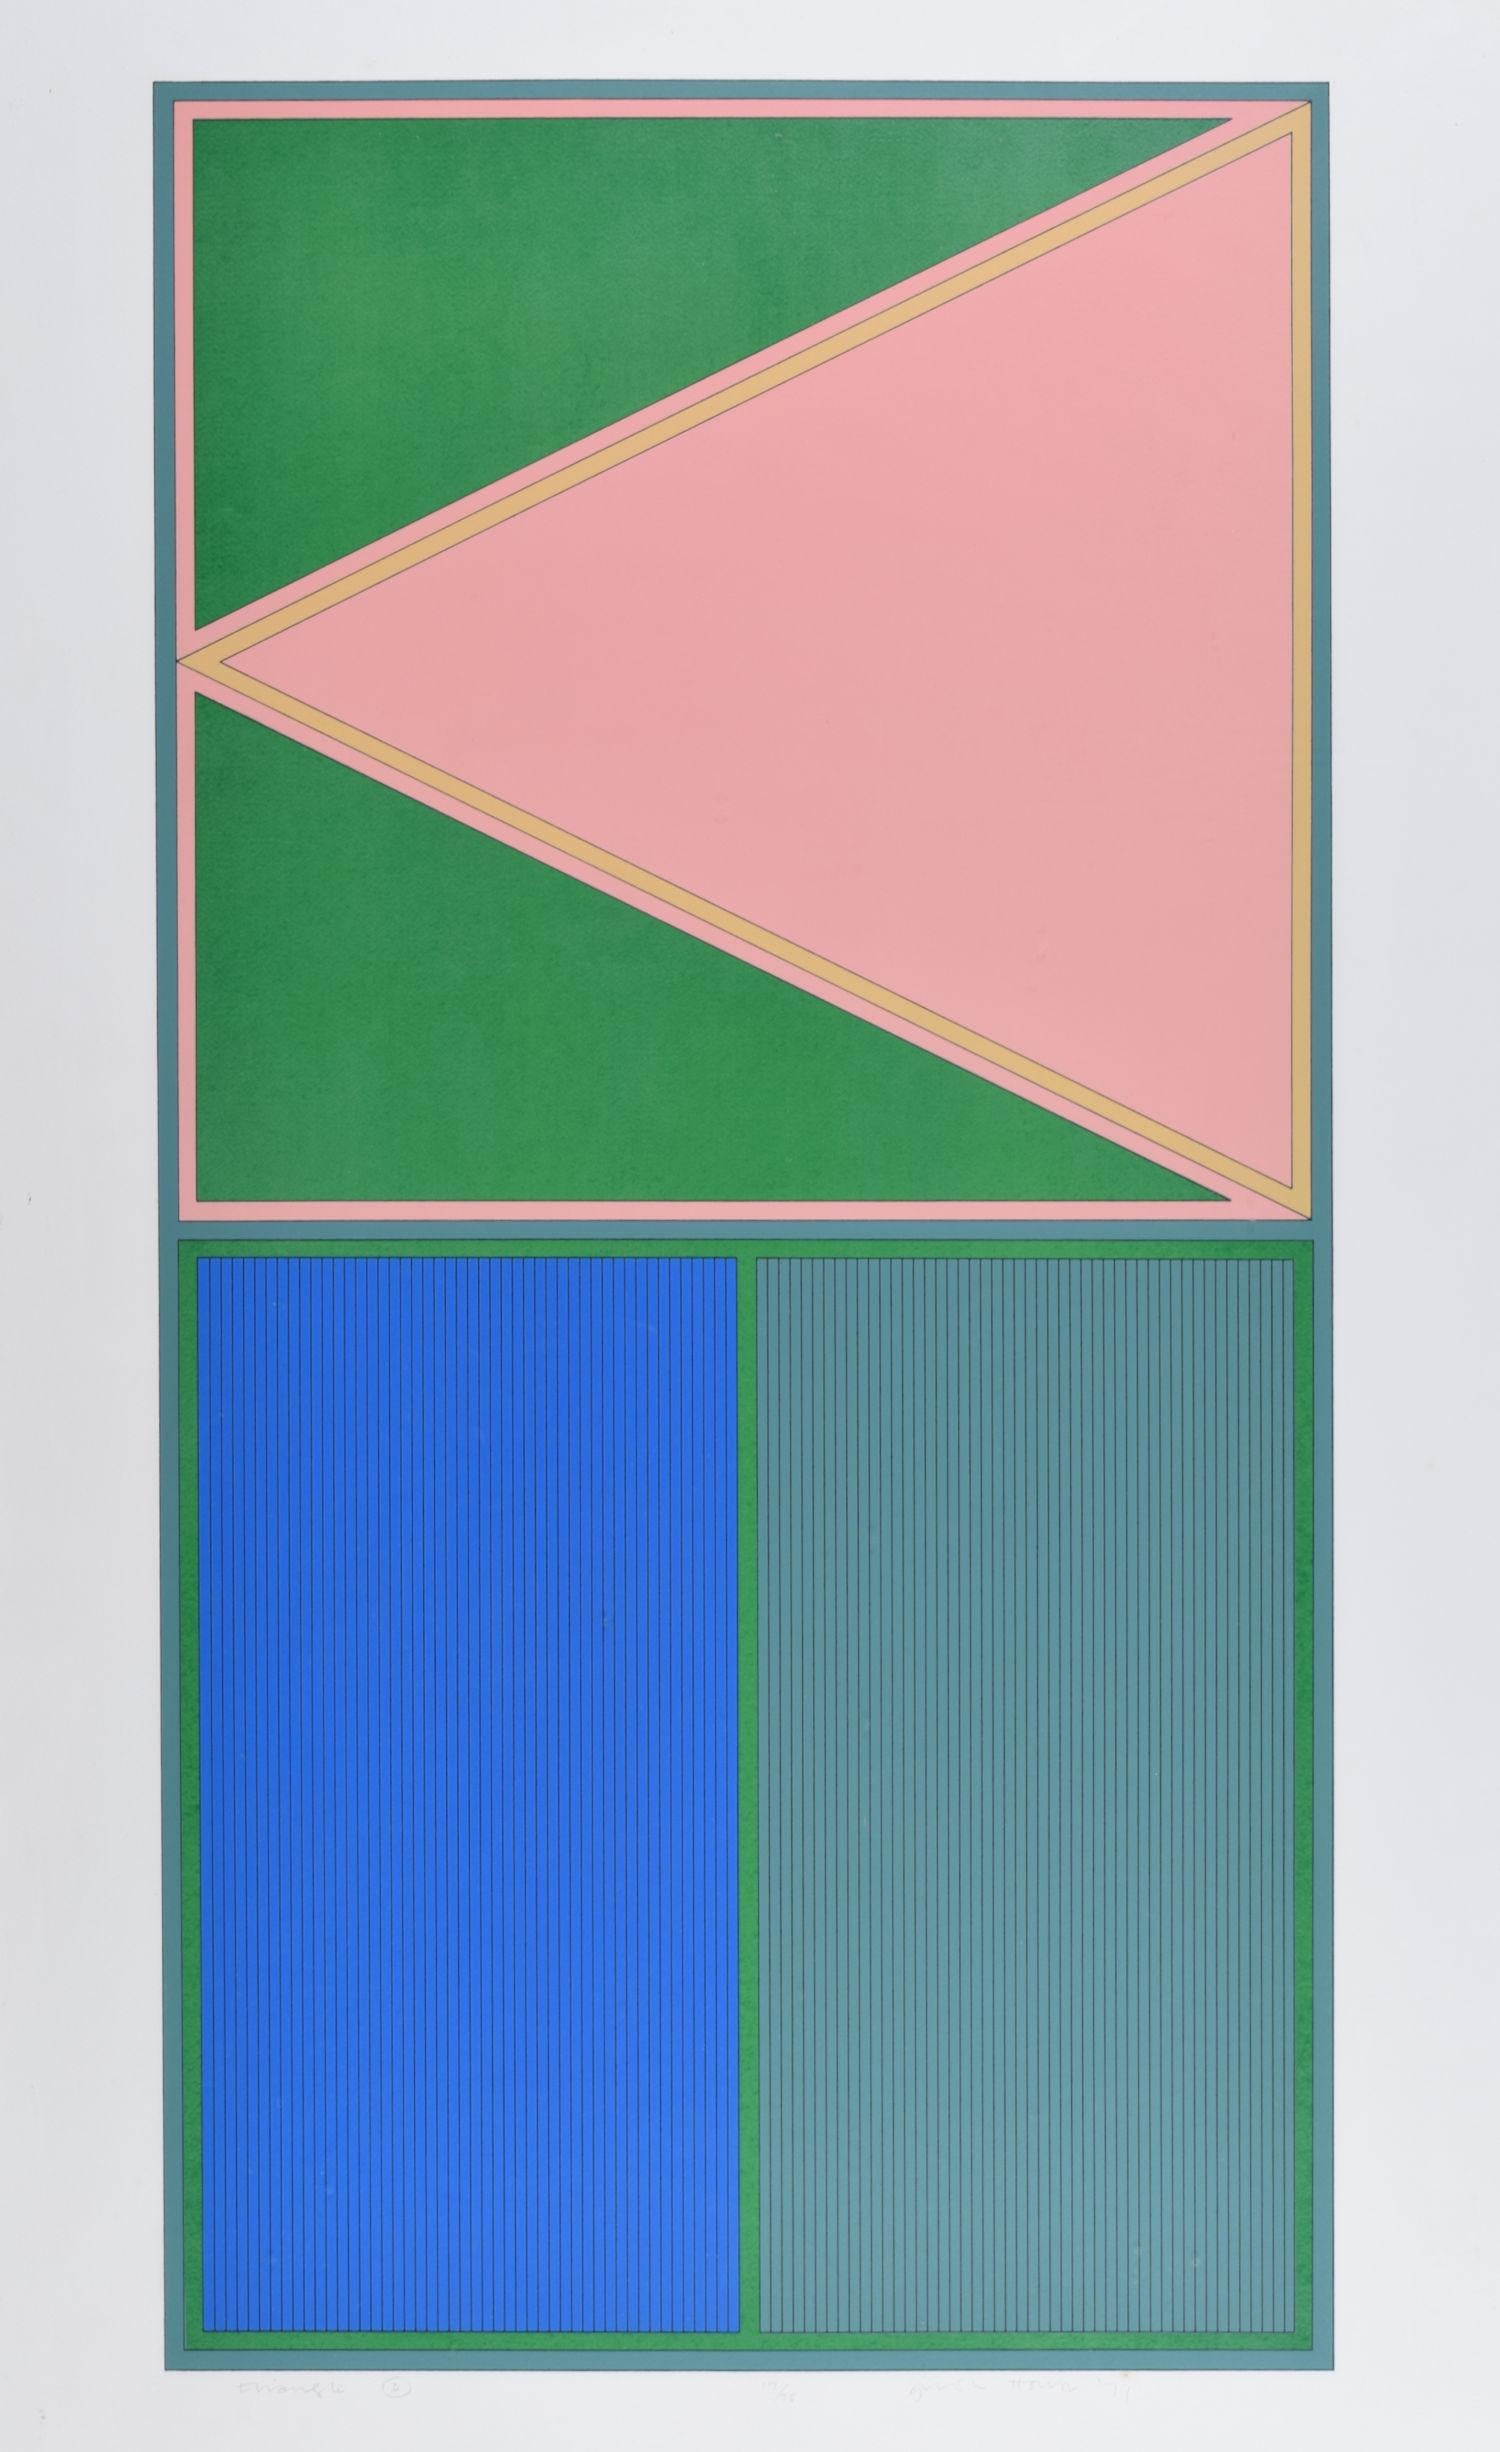 Triangle D modern abstract lithograph in green, pink, and blue by Gordon House